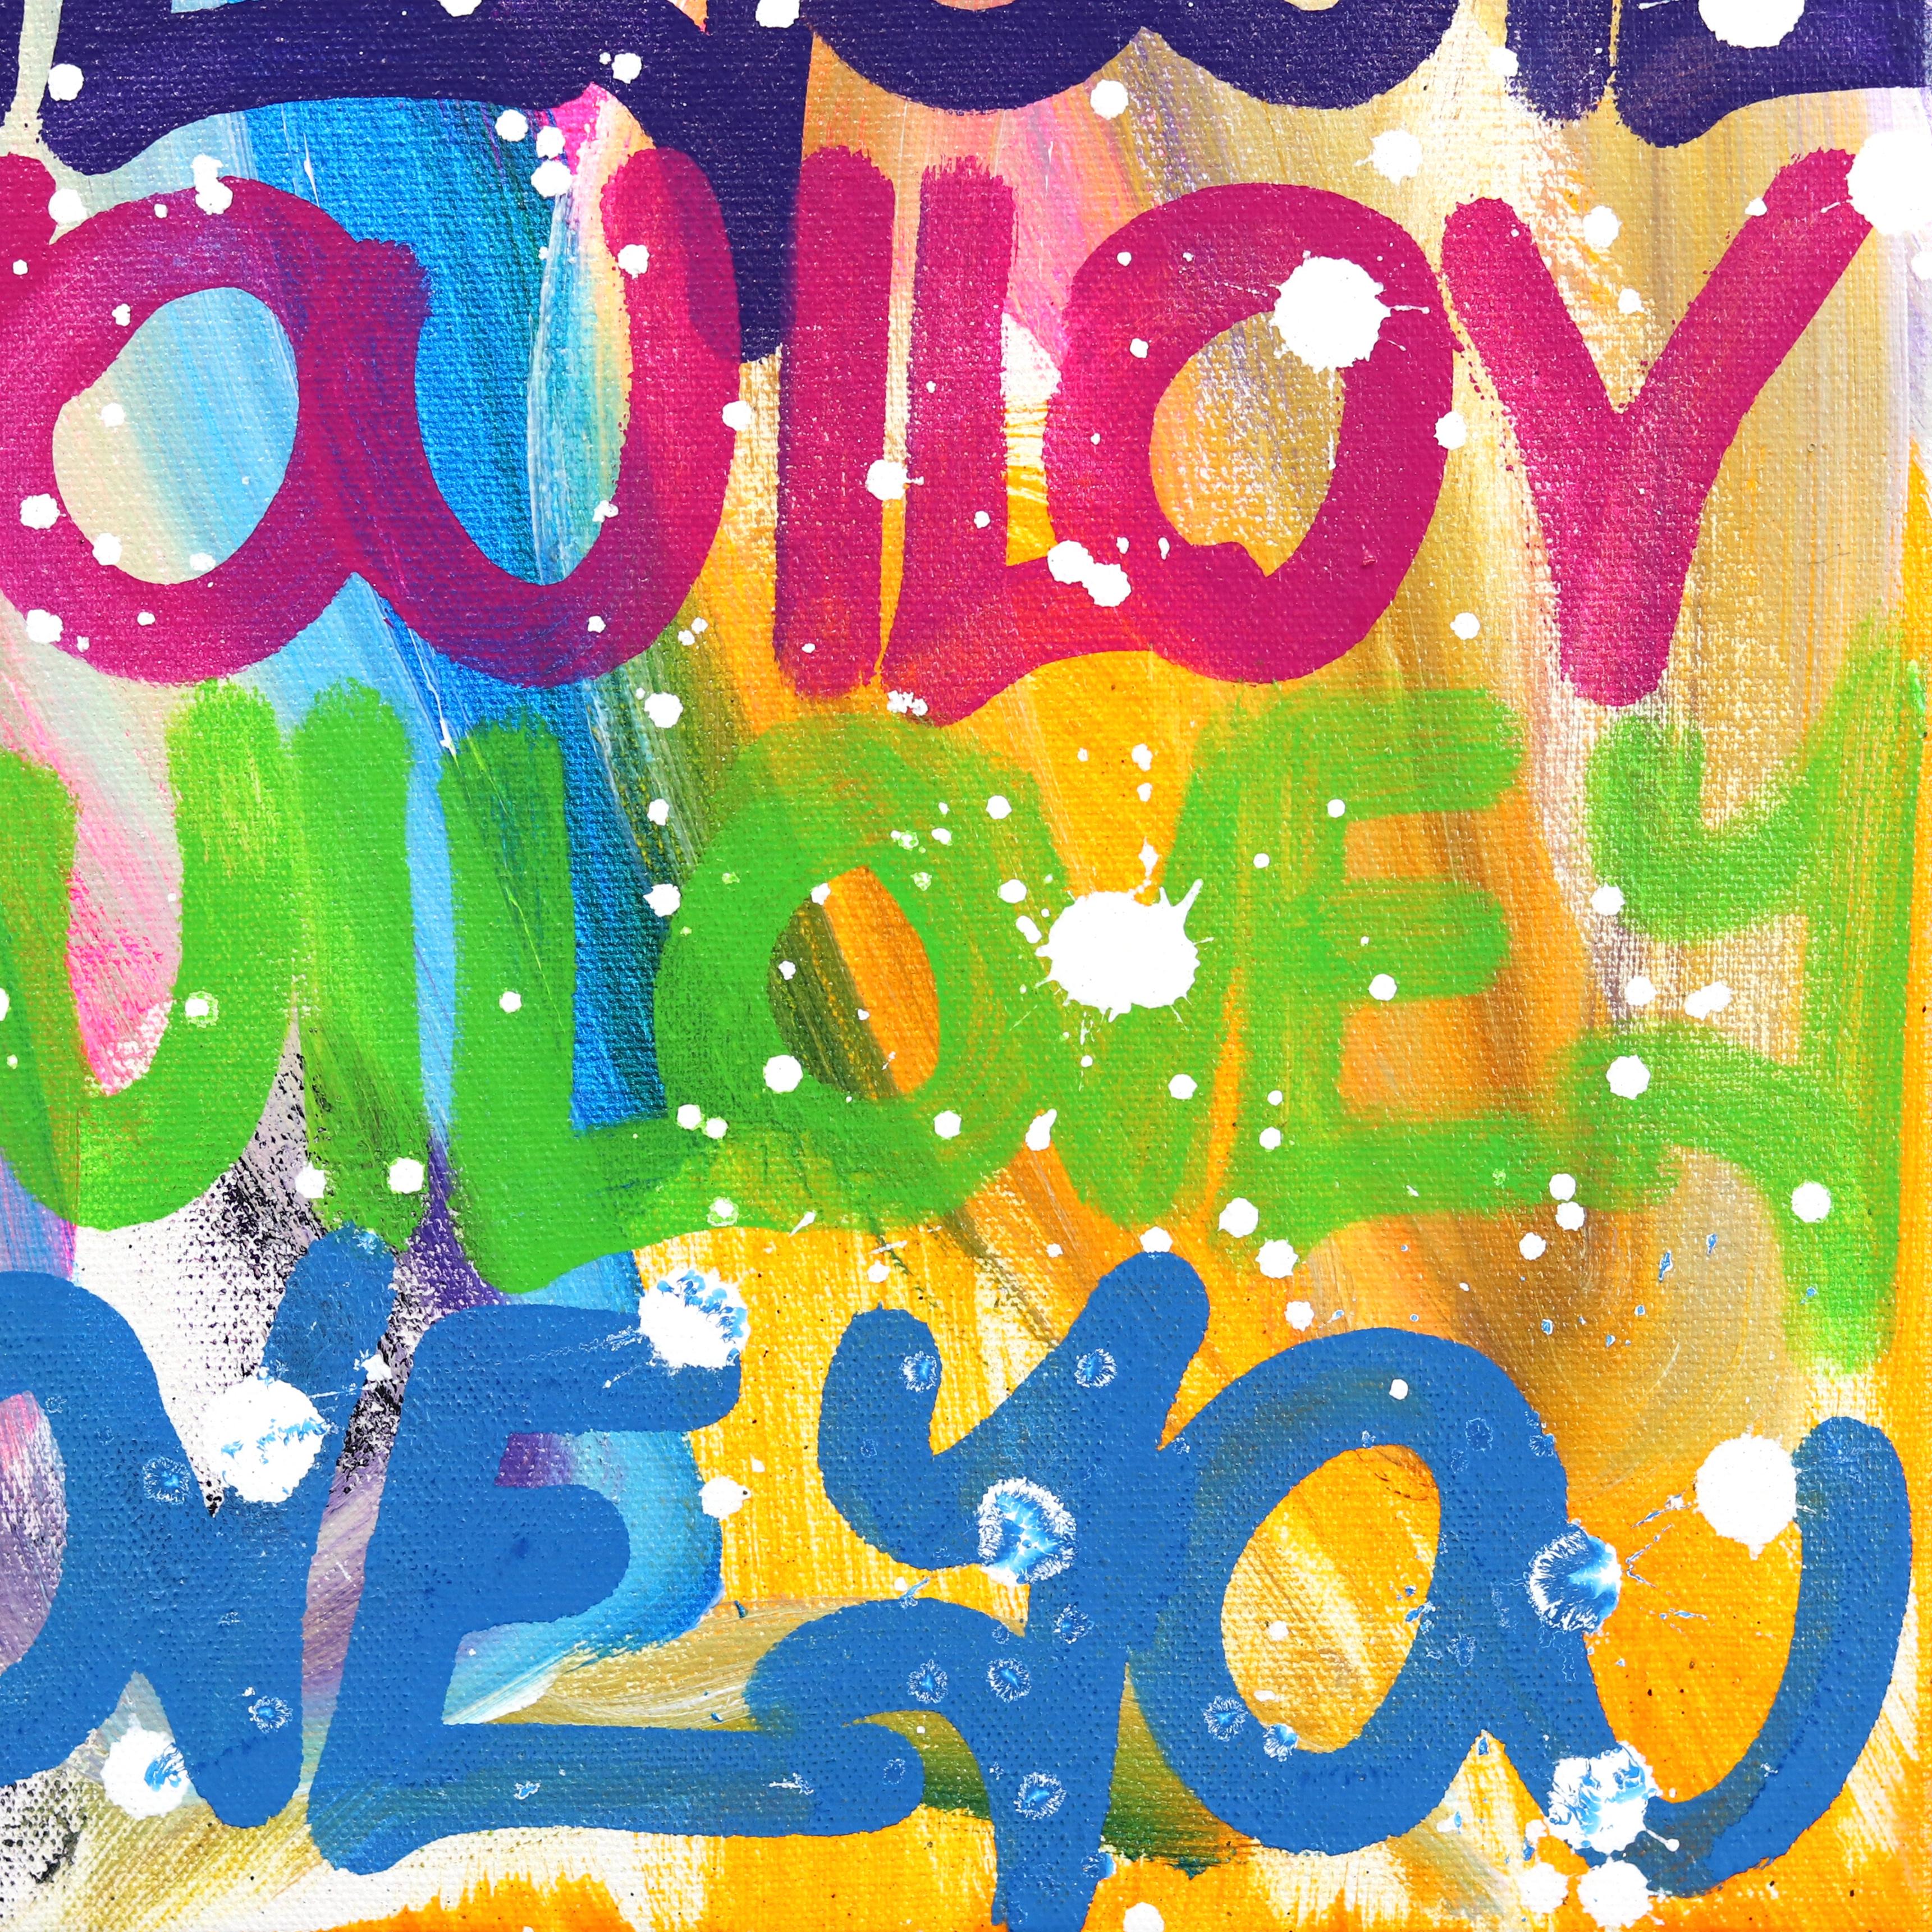 Show Your Colorful Side - Colorful Original Love Graffiti Painting on Canvas For Sale 5